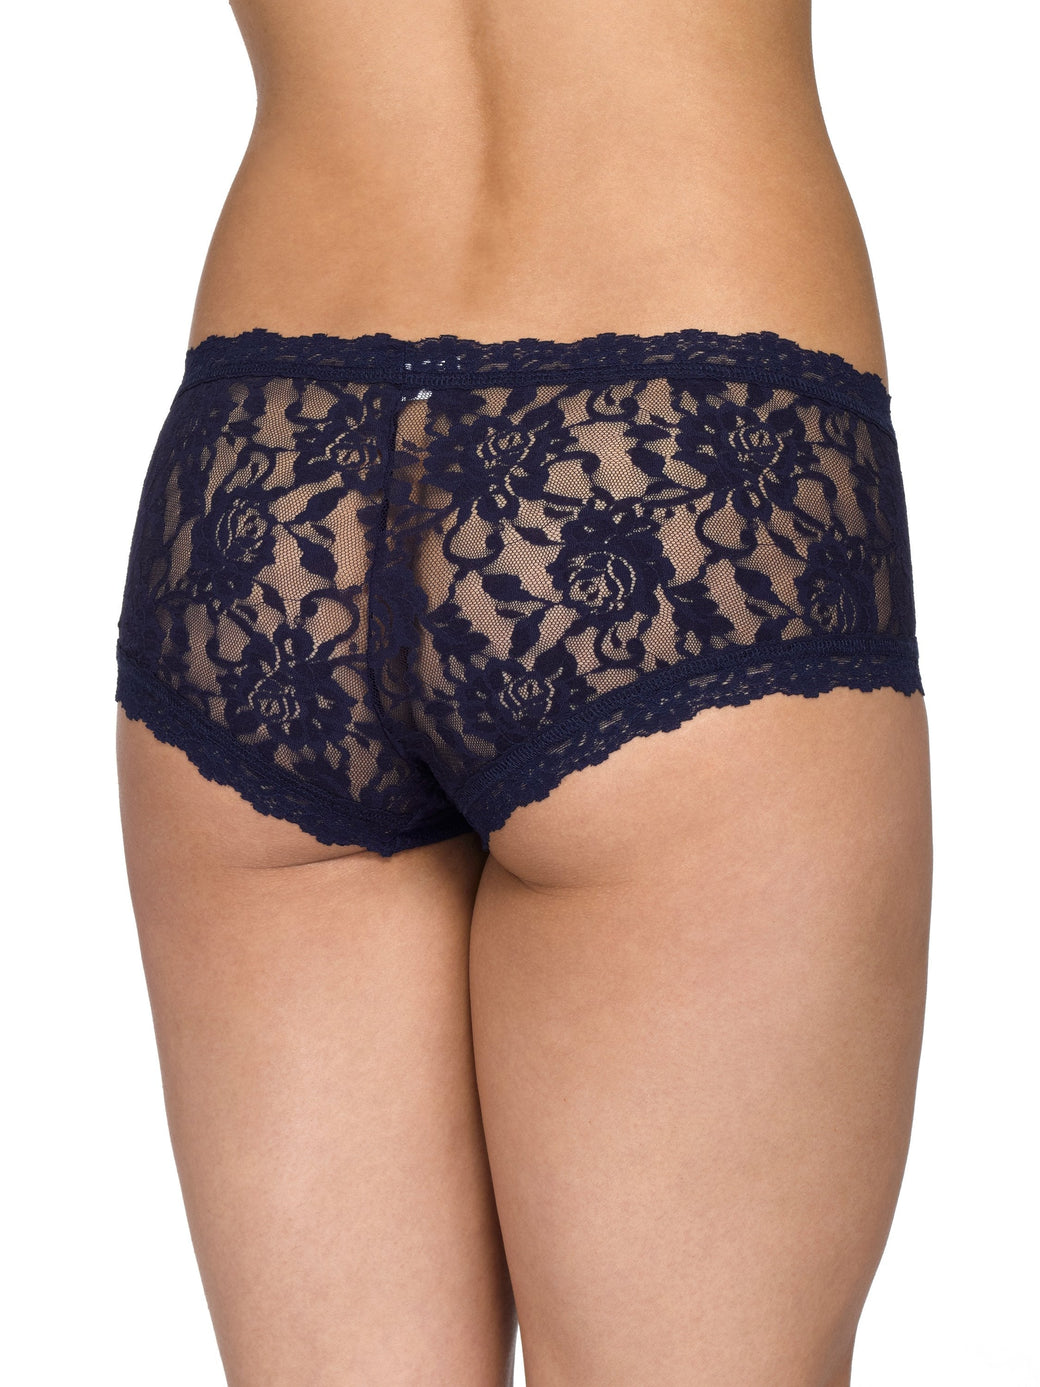 Hanky Panky Signature Lace Boyshort in Navy, available at LaSource in Darien.